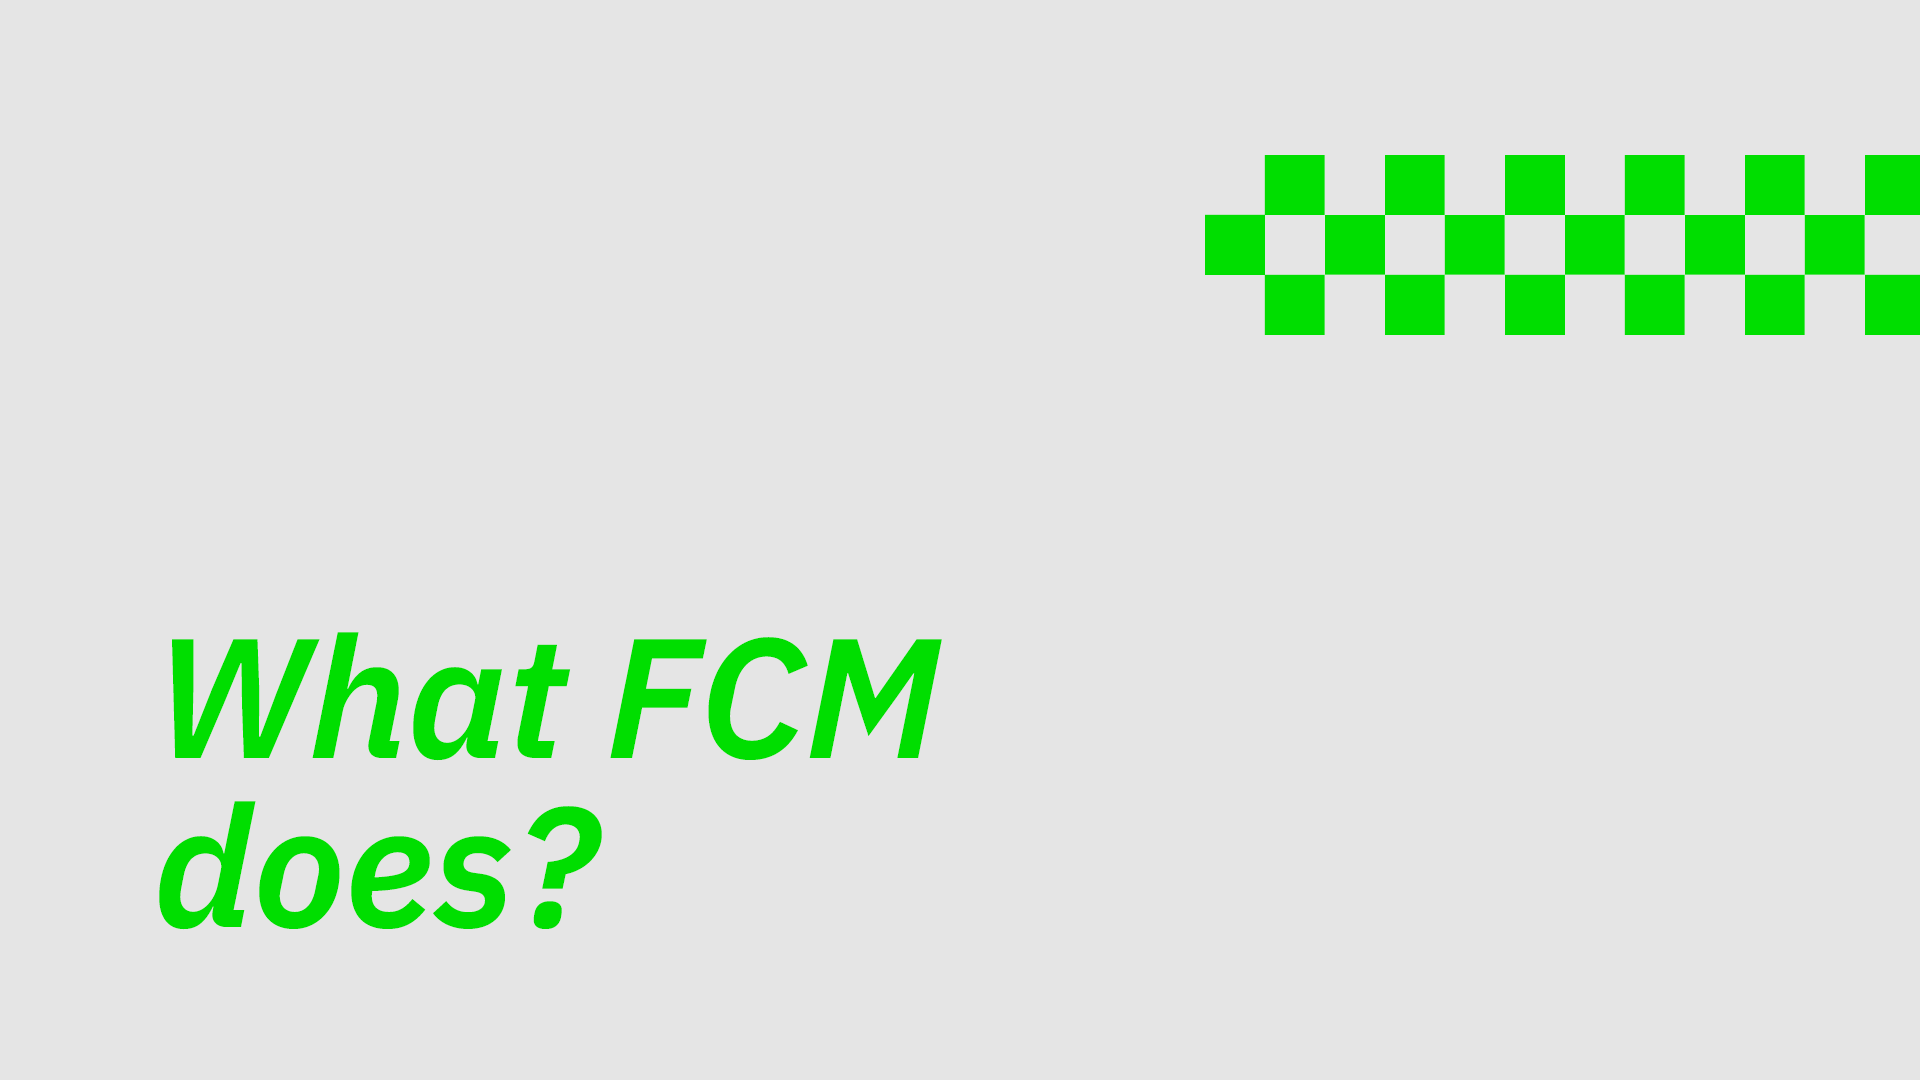 what does fcm travel stand for